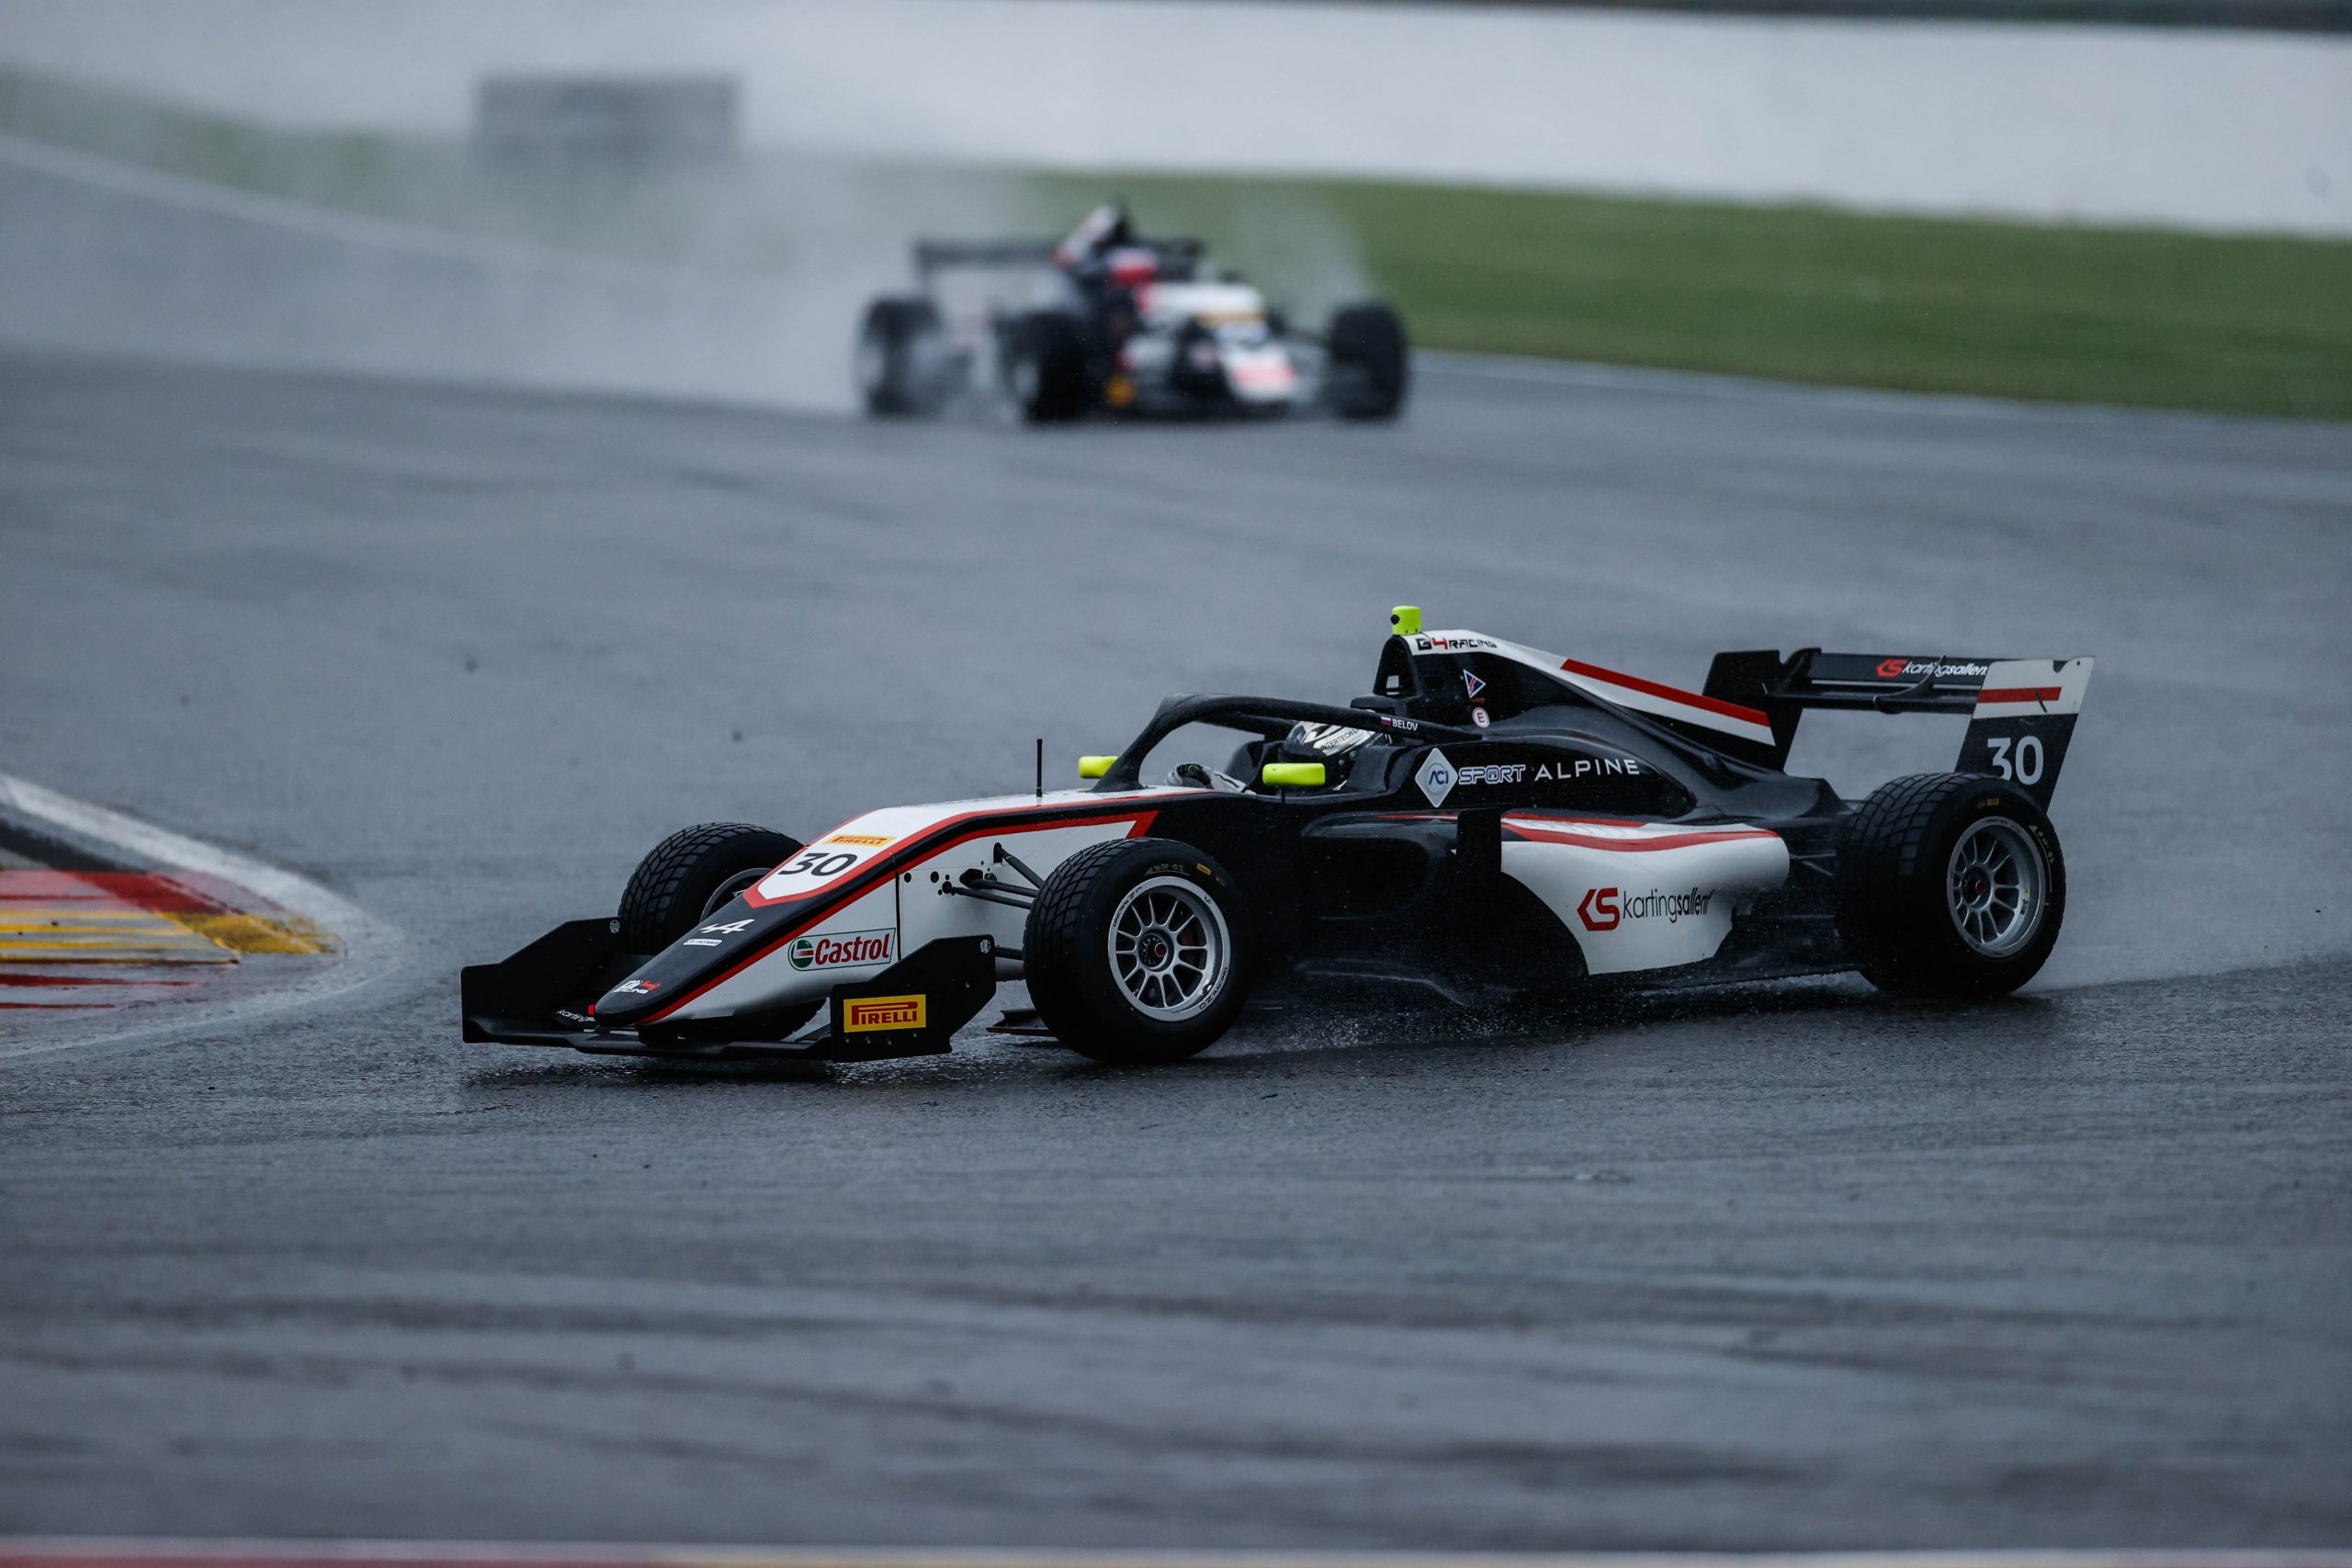 G4 Racing takes maiden FRECA win at Spa-Francorchamps